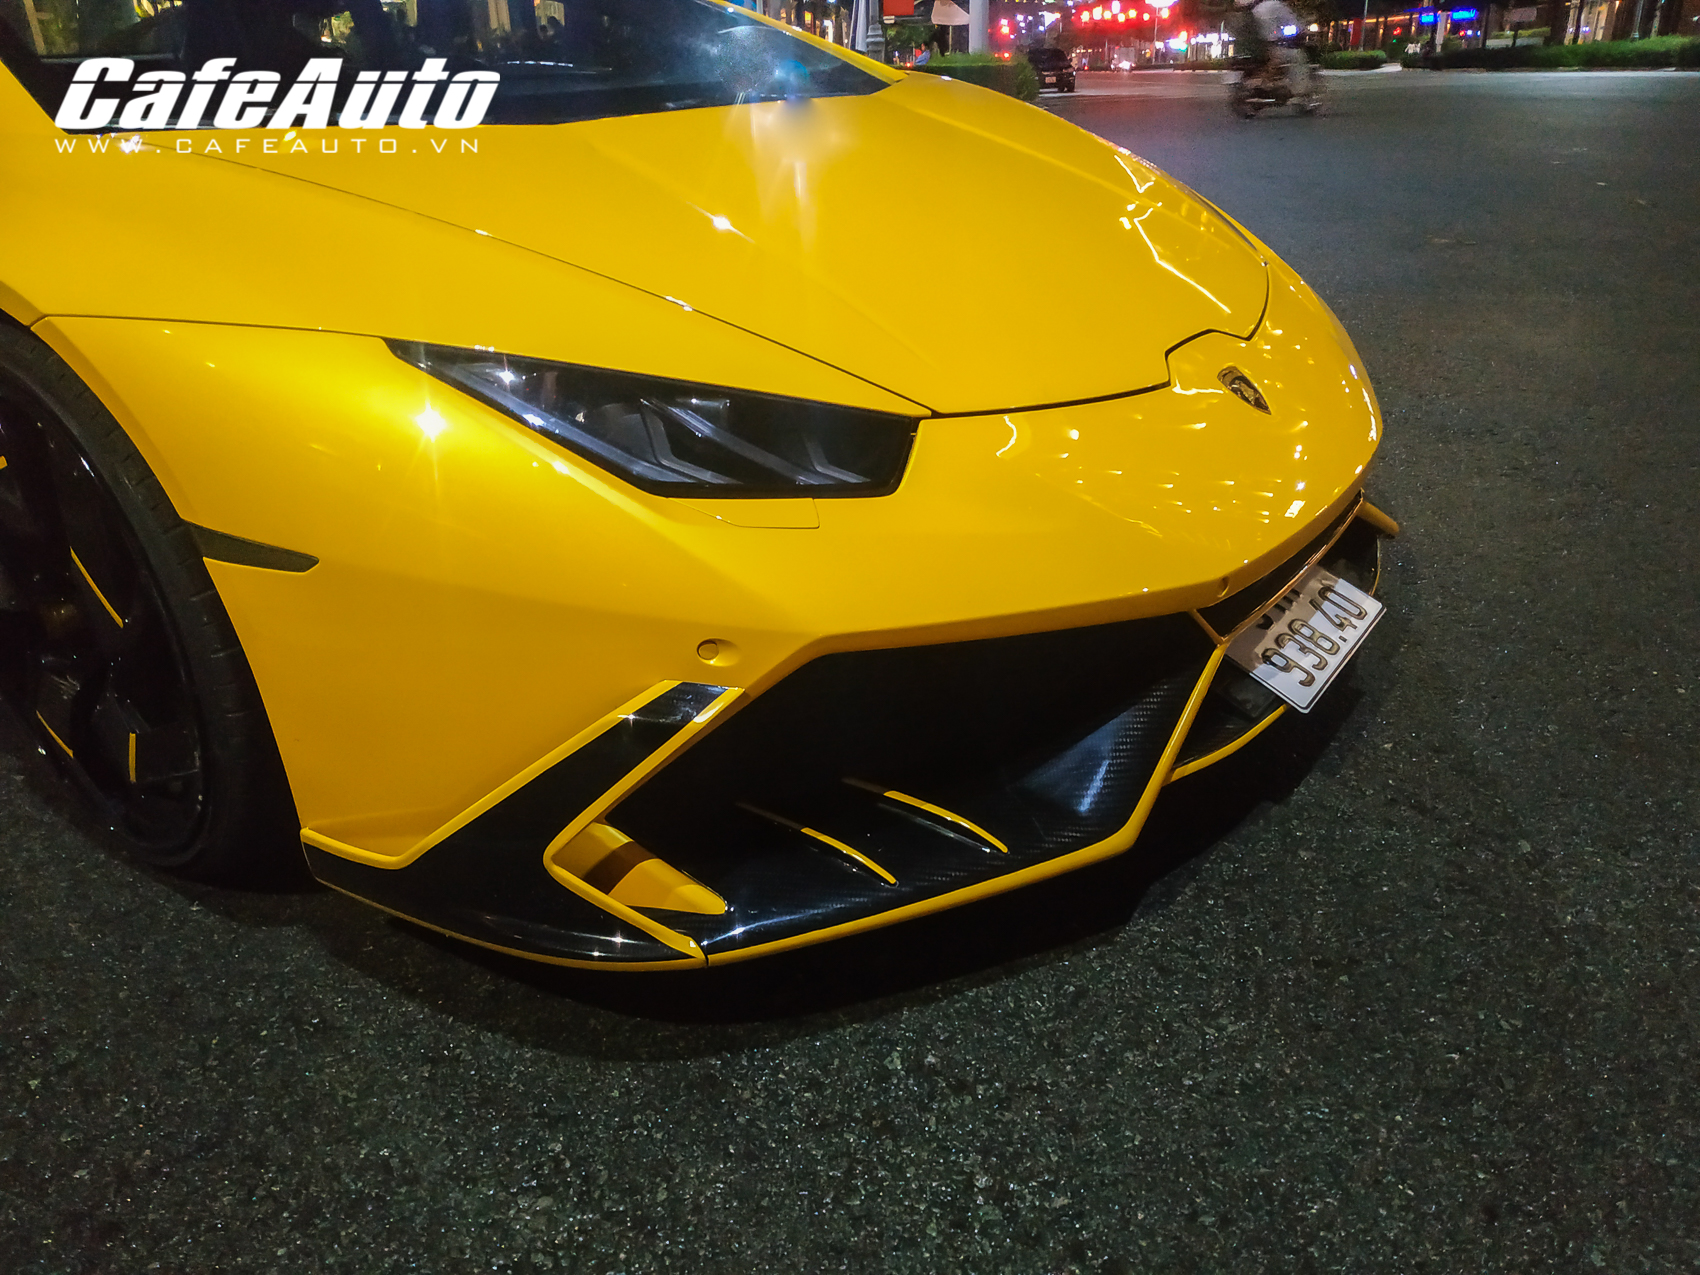 huracanmansory-cafeautovn-6